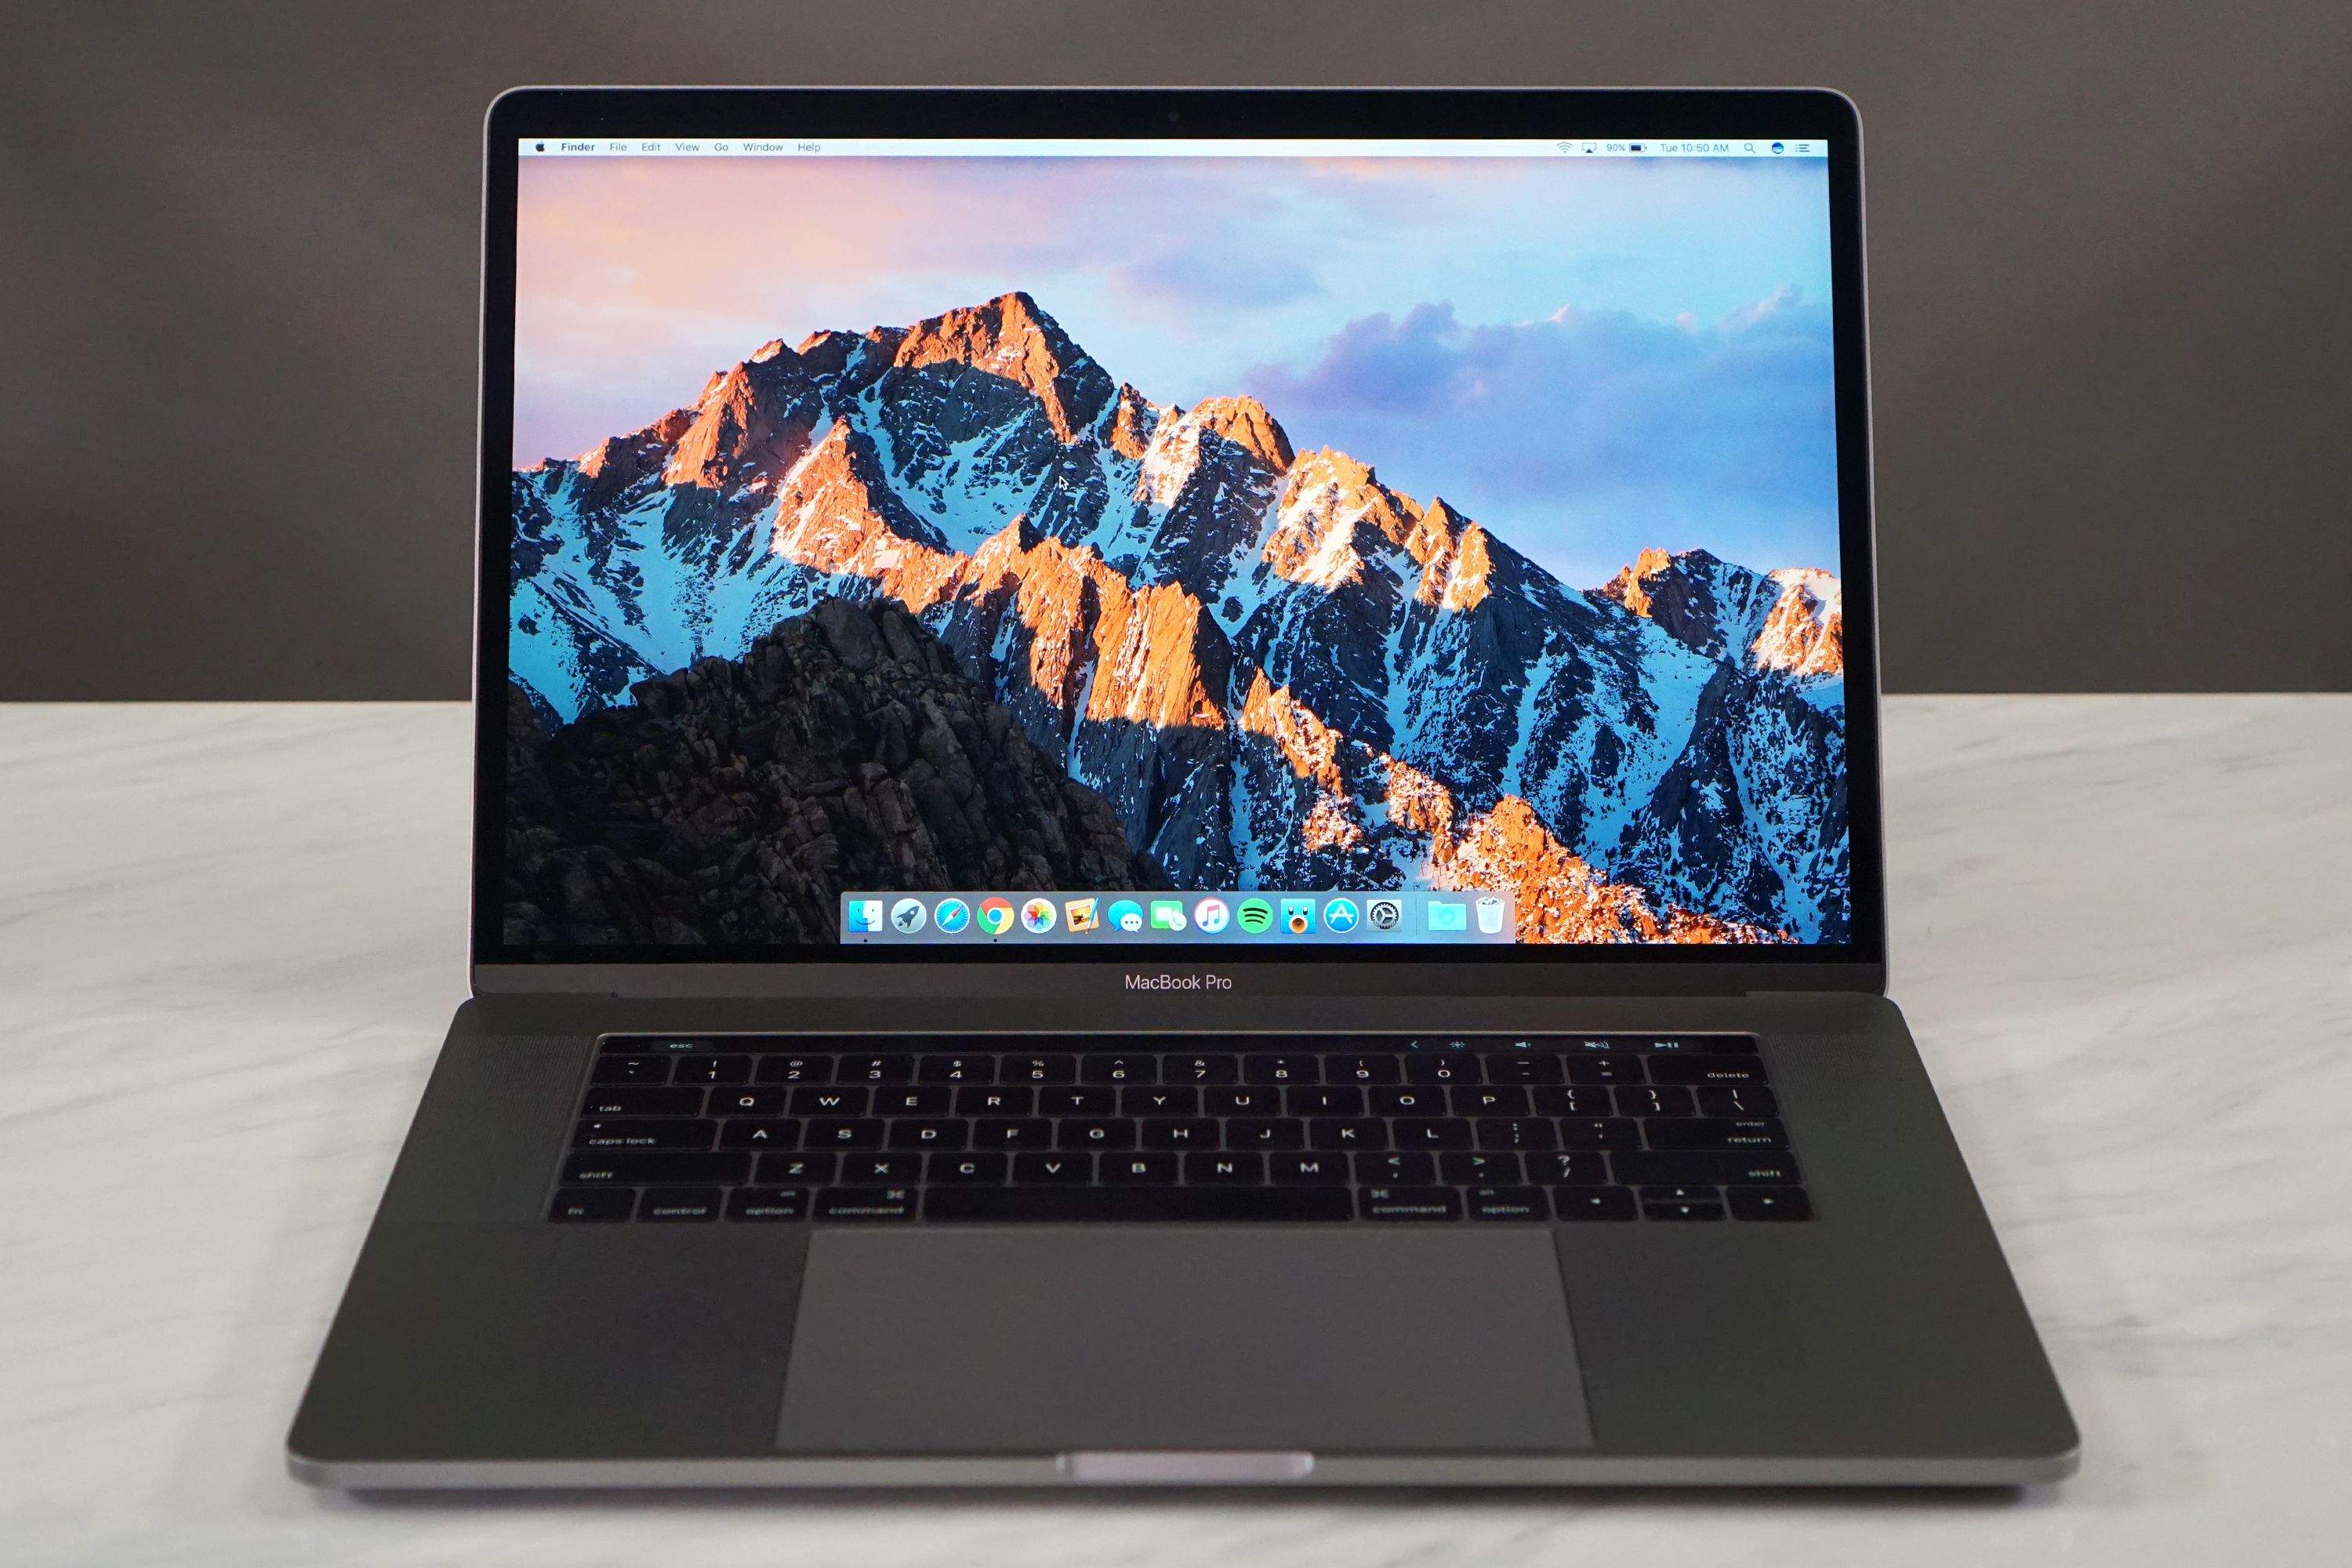 New Apple MacBook Pro 15-inch with Touch Bar Laptop Review 2016